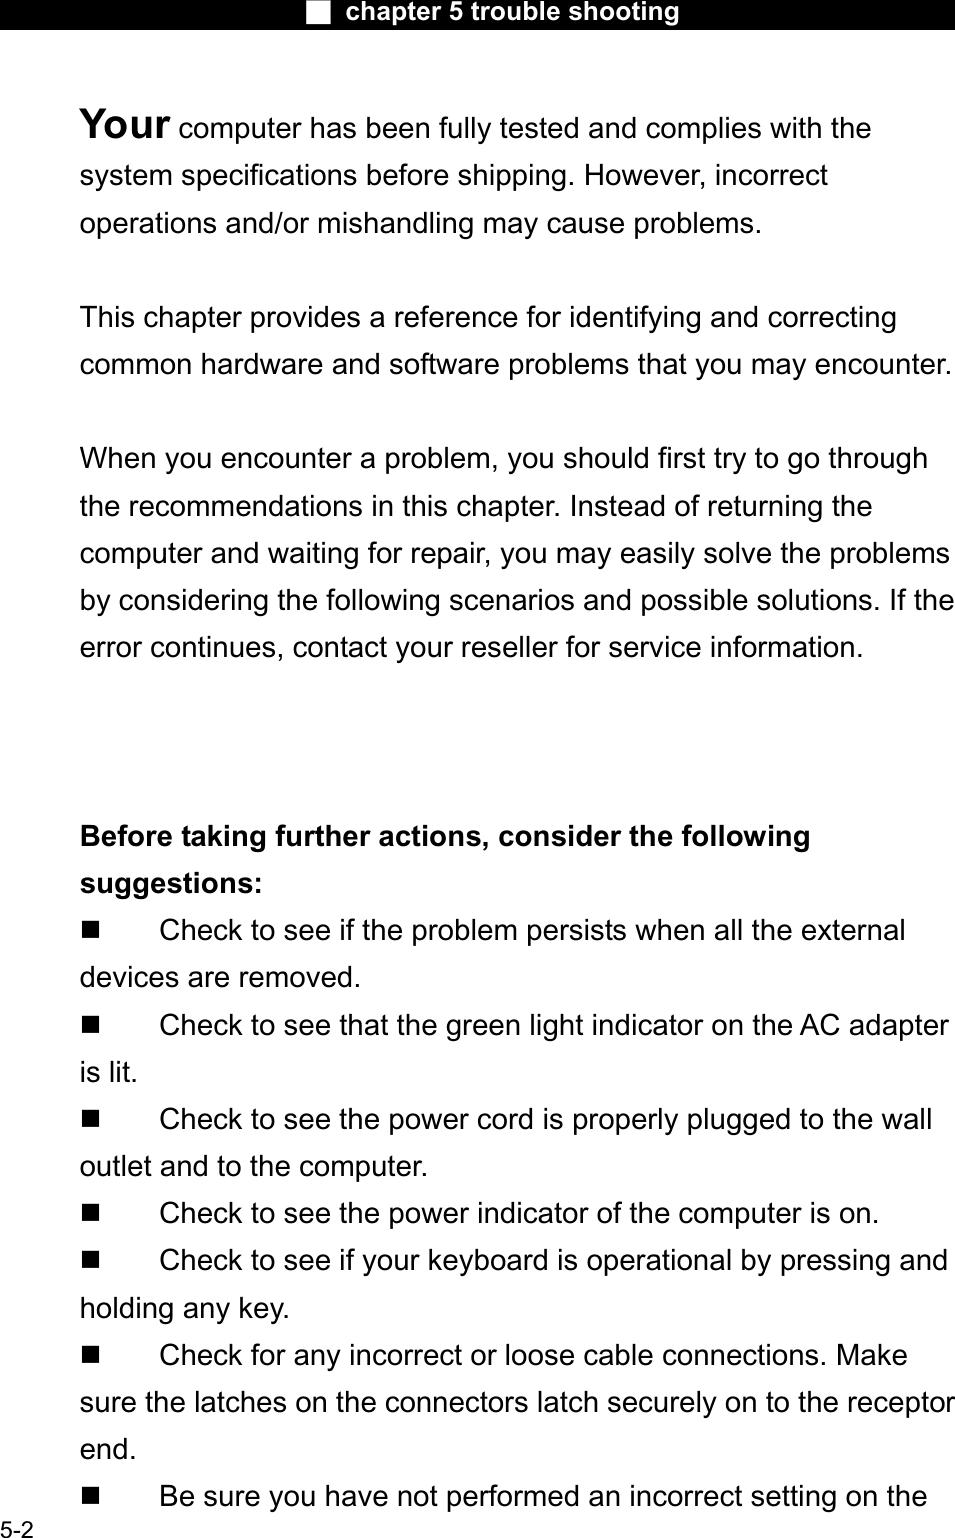 Ϯ chapter 5 trouble shootingYour computer has been fully tested and complies with the system specifications before shipping. However, incorrect operations and/or mishandling may cause problems.This chapter provides a reference for identifying and correctingcommon hardware and software problems that you may encounter.When you encounter a problem, you should first try to go throughthe recommendations in this chapter. Instead of returning the computer and waiting for repair, you may easily solve the problemsby considering the following scenarios and possible solutions. If theerror continues, contact your reseller for service information.Before taking further actions, consider the followingsuggestions: Check to see if the problem persists when all the external devices are removed.  Check to see that the green light indicator on the AC adapteris lit.  Check to see the power cord is properly plugged to the wall outlet and to the computer. Check to see the power indicator of the computer is on. Check to see if your keyboard is operational by pressing and holding any key. Check for any incorrect or loose cable connections. Make sure the latches on the connectors latch securely on to the receptorend. Be sure you have not performed an incorrect setting on the 5-2